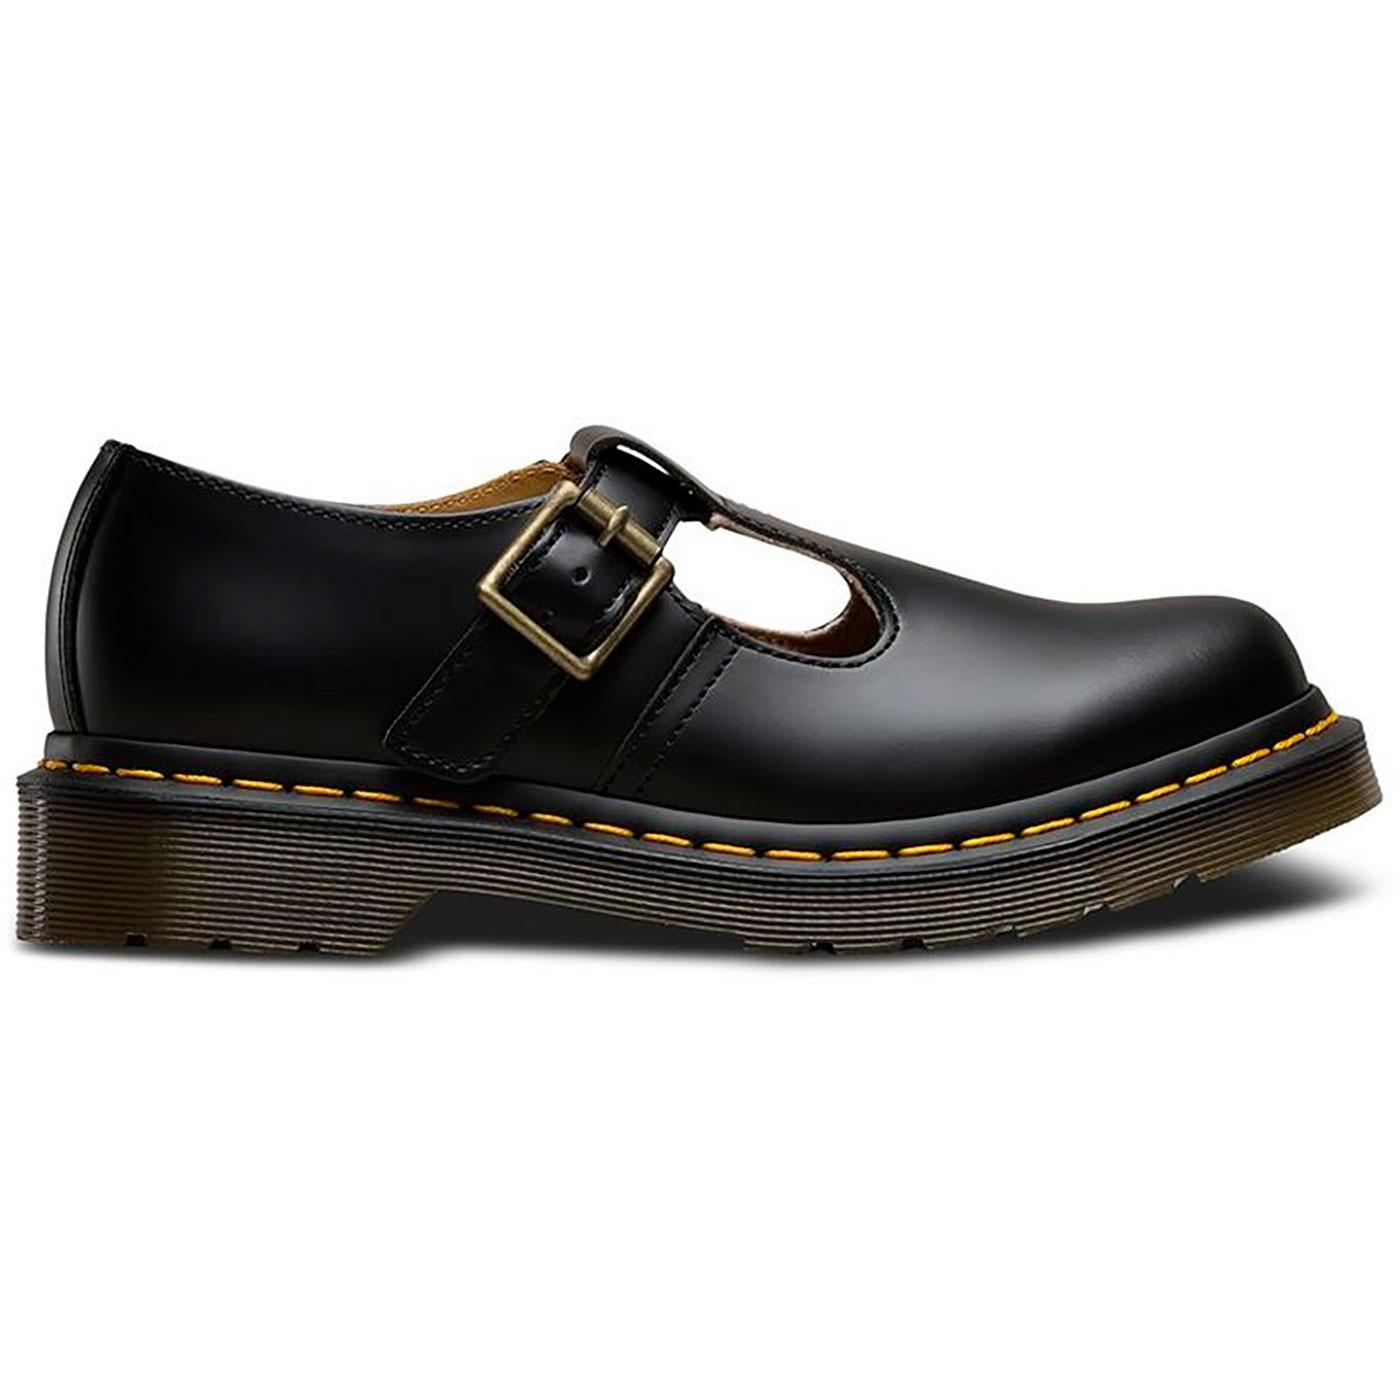 Dr Martens Polley Retro 60s Mod Mary Jane T-Bar Shoes in Black